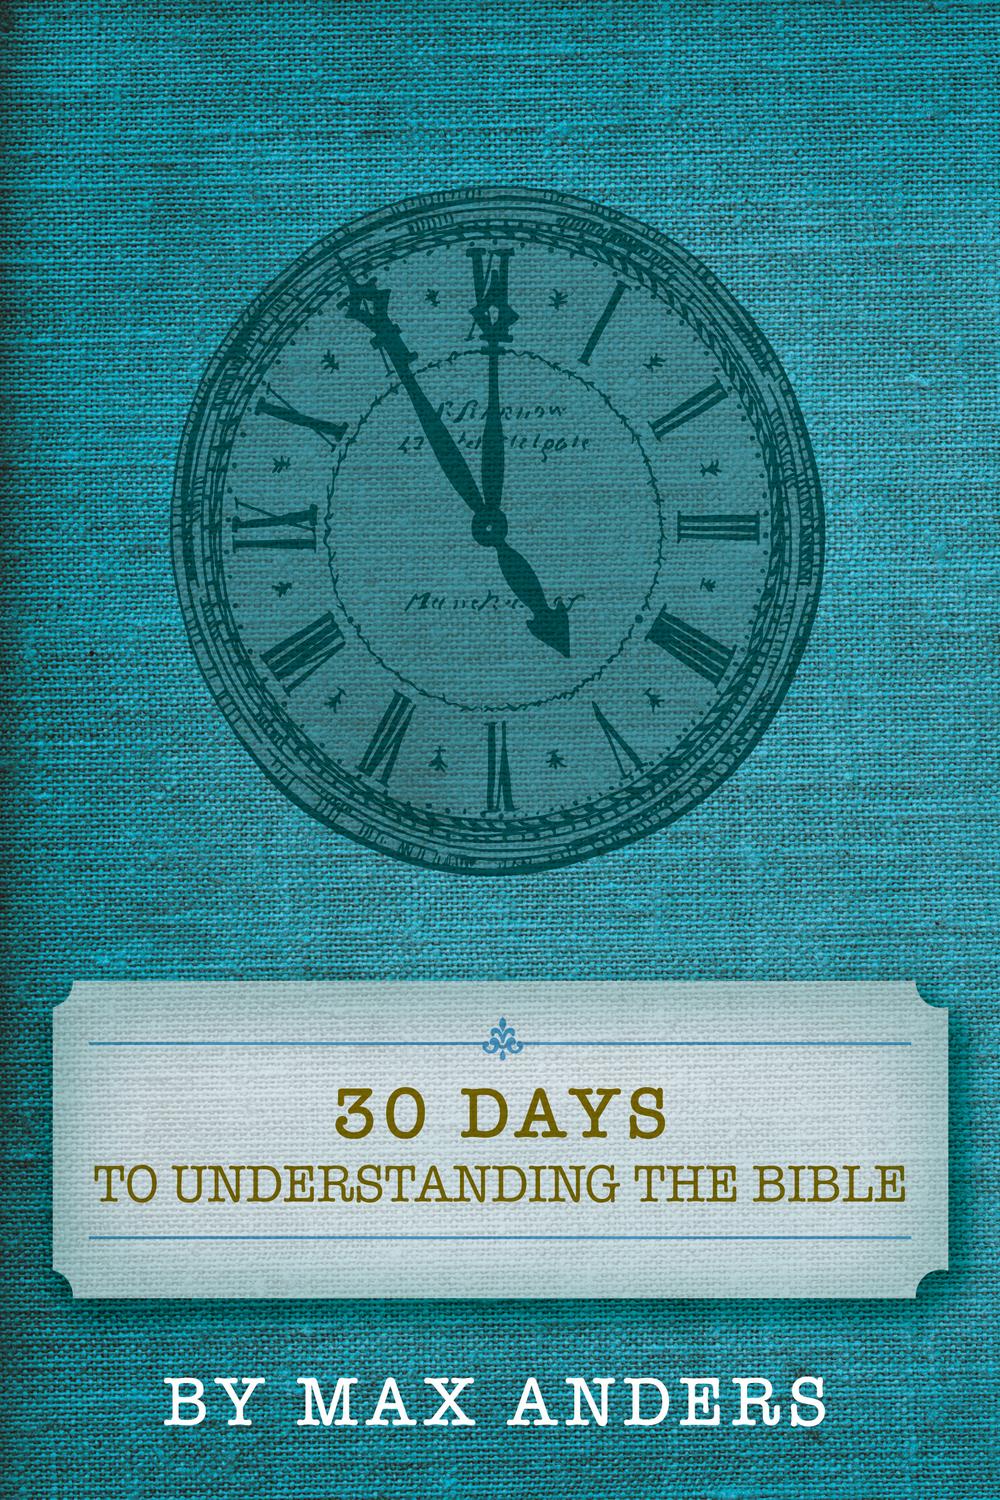 30 Days to Understanding the Bible - Max Anders